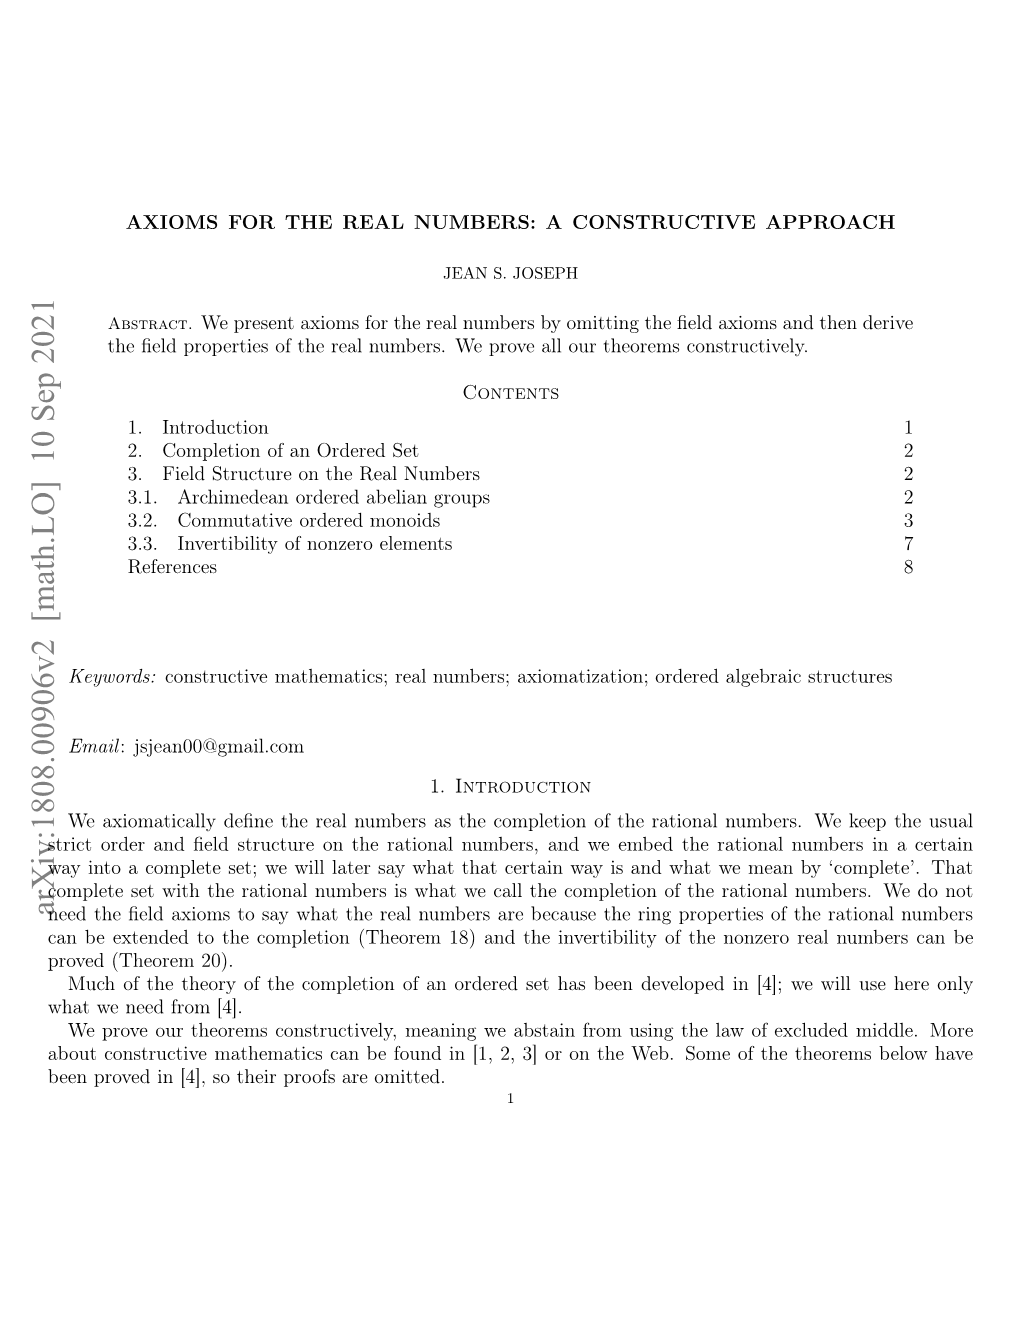 Axioms for the Real Numbers: a Constructive Approach 2 2